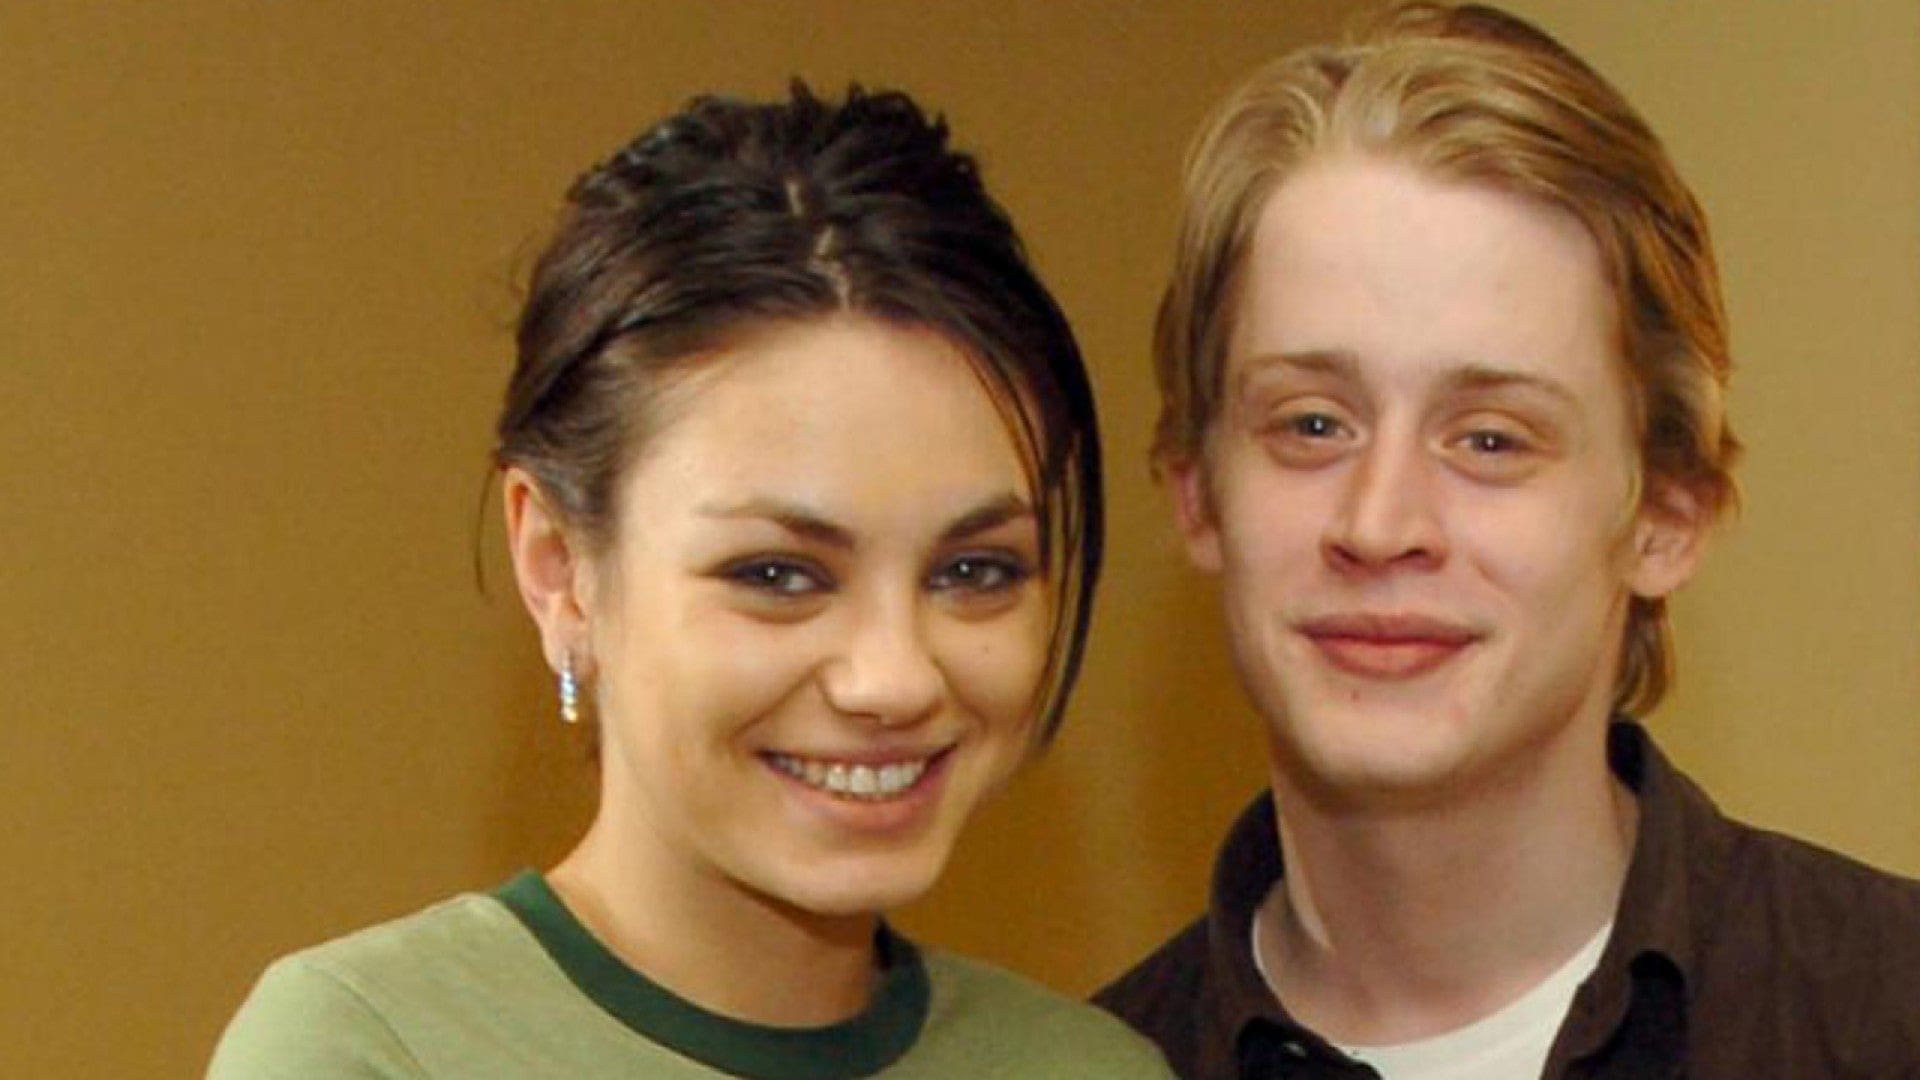 mila-kunis-reportedly-takes-comfort-in-knowing-that-macaulay-culkin-has-a-happy-family-with-brenda-song-and-their-baby-but-will-not-congratulate-them-heres-why